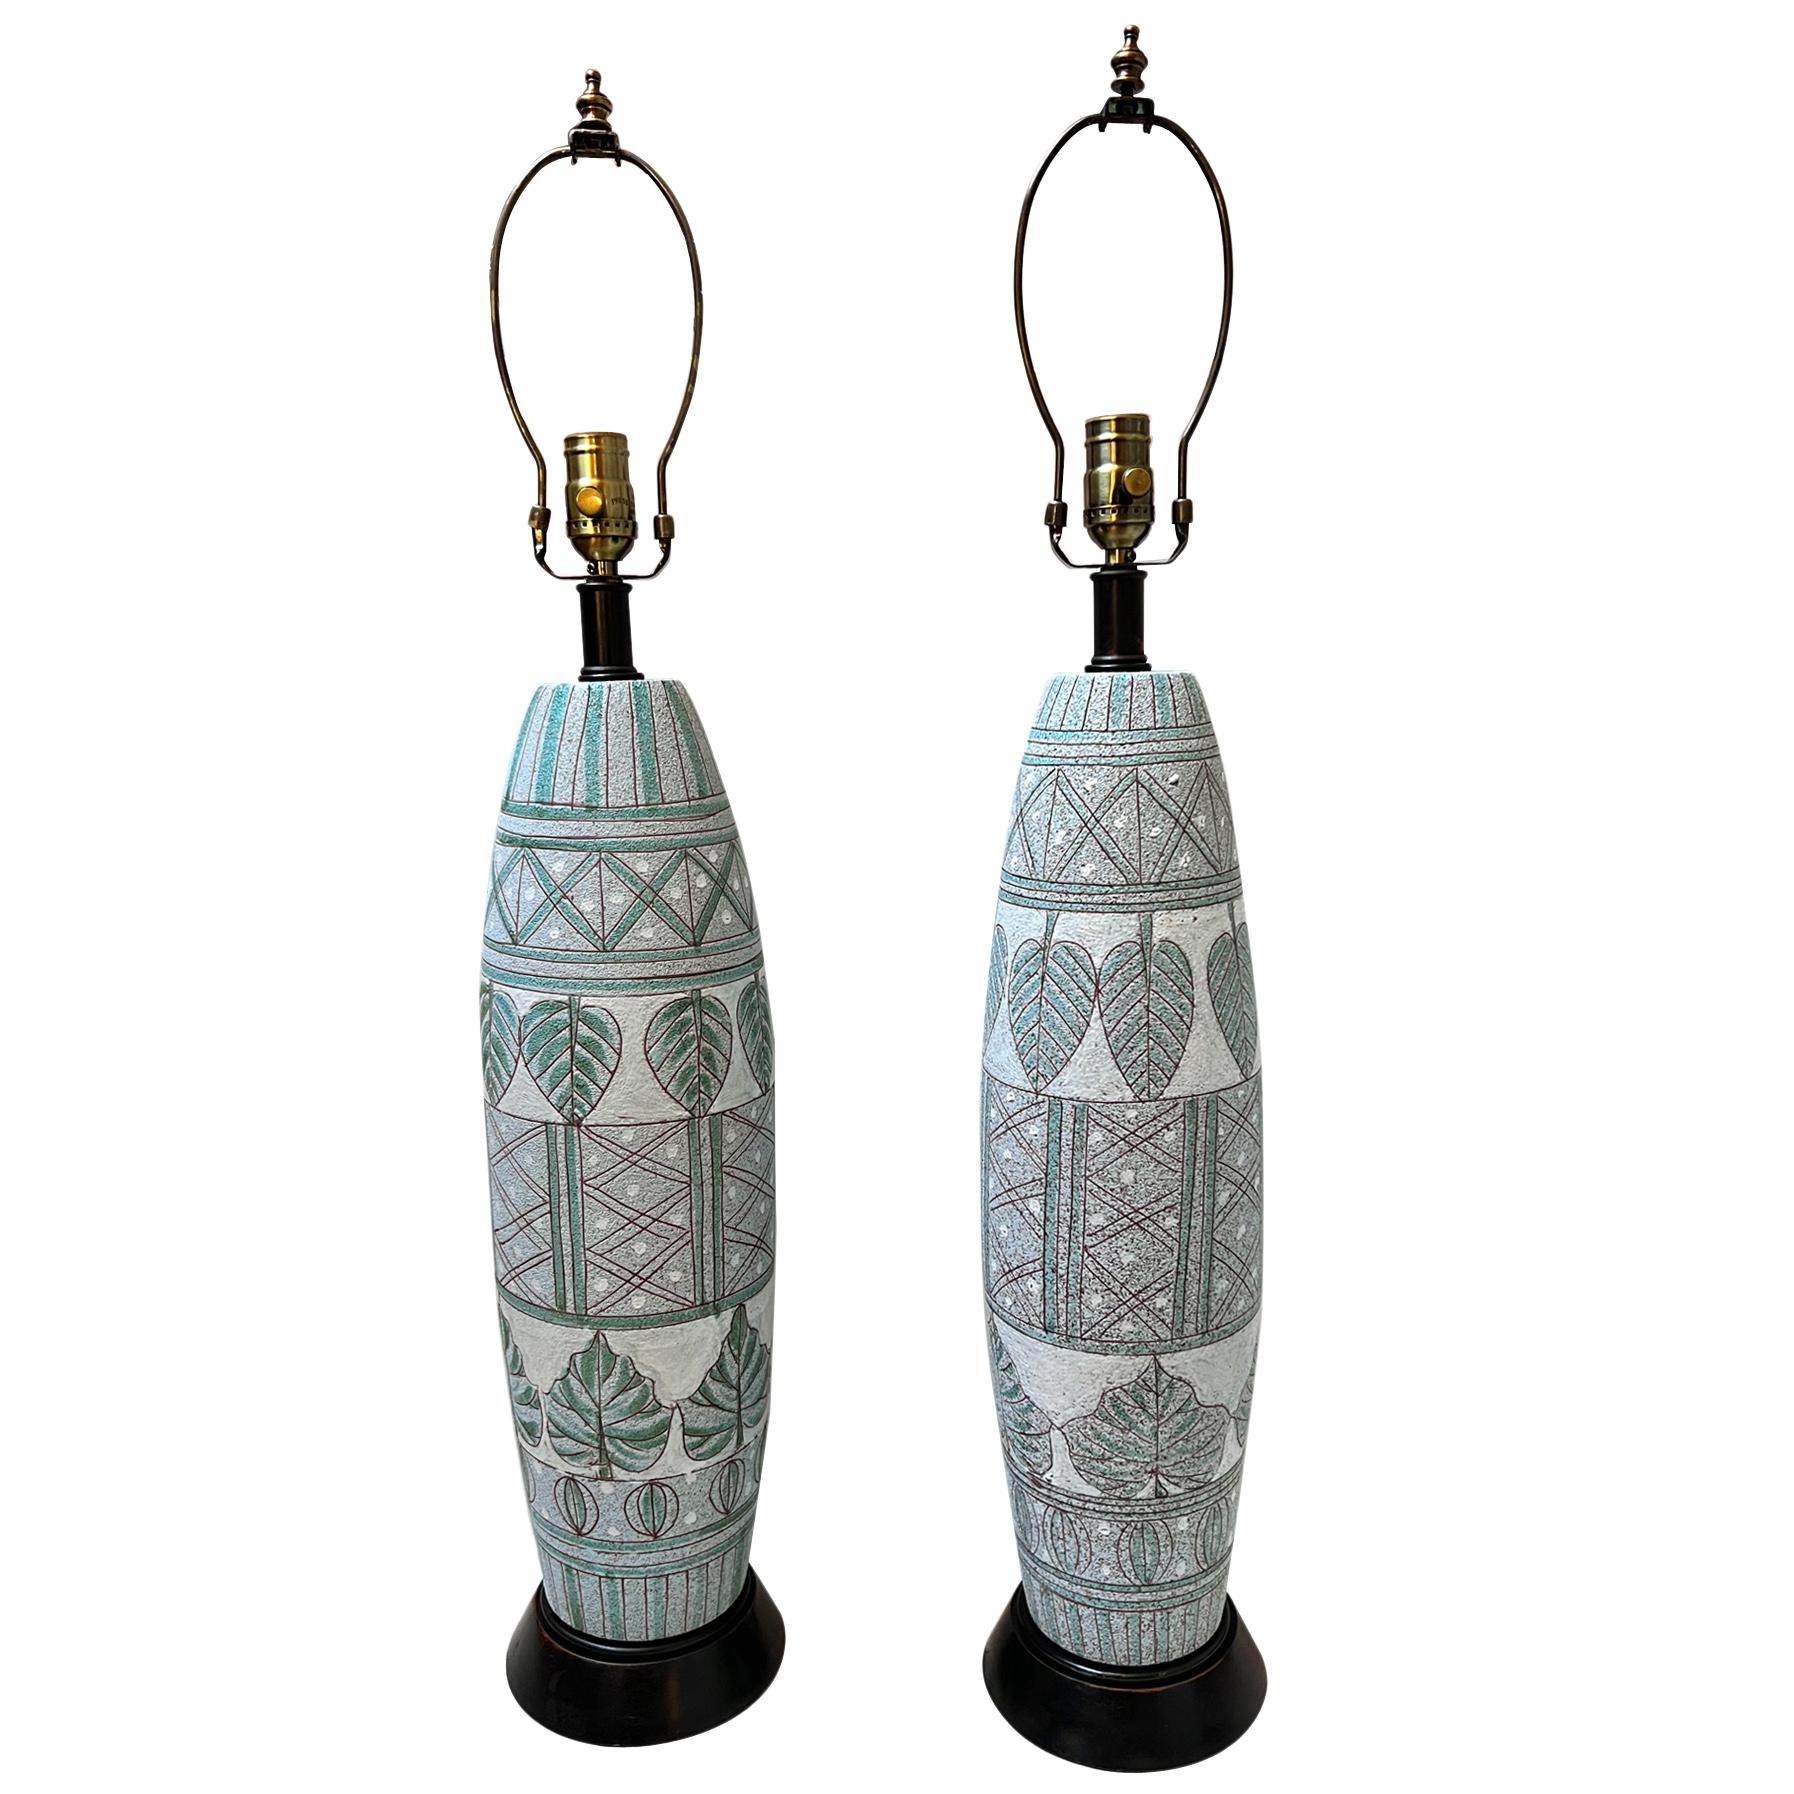 Pair of circa 1960's ceramic table lamps with painted decoration.

Measurements:
Height of body: 22.5